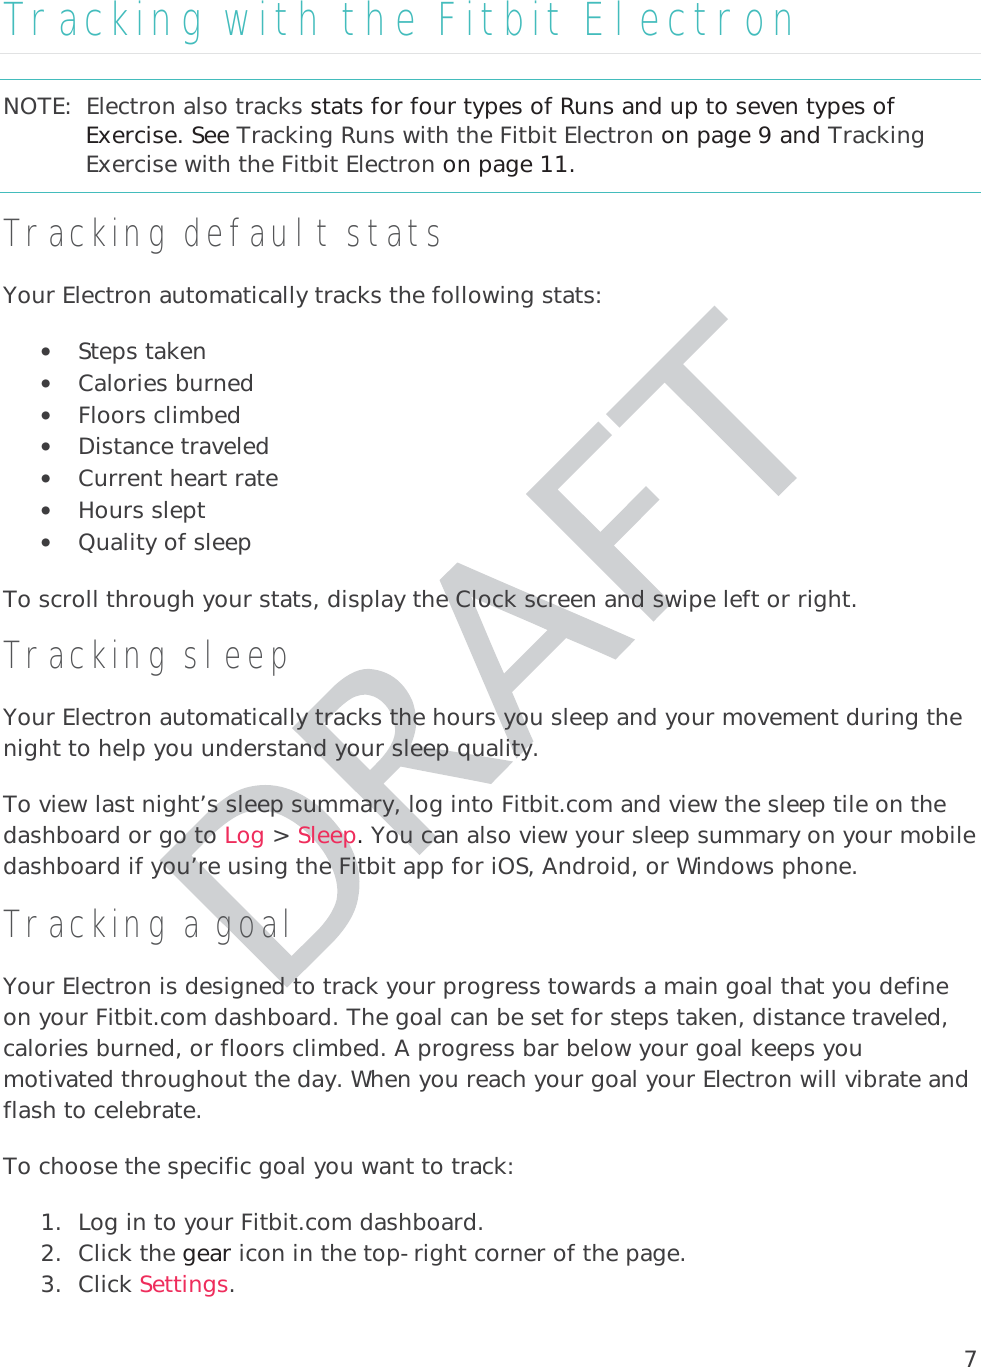 7Tracking with the Fitbit Electron NOTE:  Electron also tracks stats for four types of Runs and up to seven types of Exercise. See Tracking Runs with the Fitbit Electron on page 9 and Tracking Exercise with the Fitbit Electron on page 11. Tracking default stats Your Electron automatically tracks the following stats:  • Steps taken • Calories burned • Floors climbed • Distance traveled • Current heart rate • Hours slept • Quality of sleep To scroll through your stats, display the Clock screen and swipe left or right. Tracking sleep Your Electron automatically tracks the hours you sleep and your movement during the night to help you understand your sleep quality.  To view last night’s sleep summary, log into Fitbit.com and view the sleep tile on the dashboard or go to Log &gt; Sleep. You can also view your sleep summary on your mobile dashboard if you’re using the Fitbit app for iOS, Android, or Windows phone. Tracking a goalYour Electron is designed to track your progress towards a main goal that you define on your Fitbit.com dashboard. The goal can be set for steps taken, distance traveled,calories burned, or floors climbed. A progress bar below your goal keeps you motivated throughout the day. When you reach your goal your Electron will vibrate and flash to celebrate.  To choose the specific goal you want to track:  1. Log in to your Fitbit.com dashboard.  2. Click the gear icon in the top-right corner of the page. 3. Click Settings.   